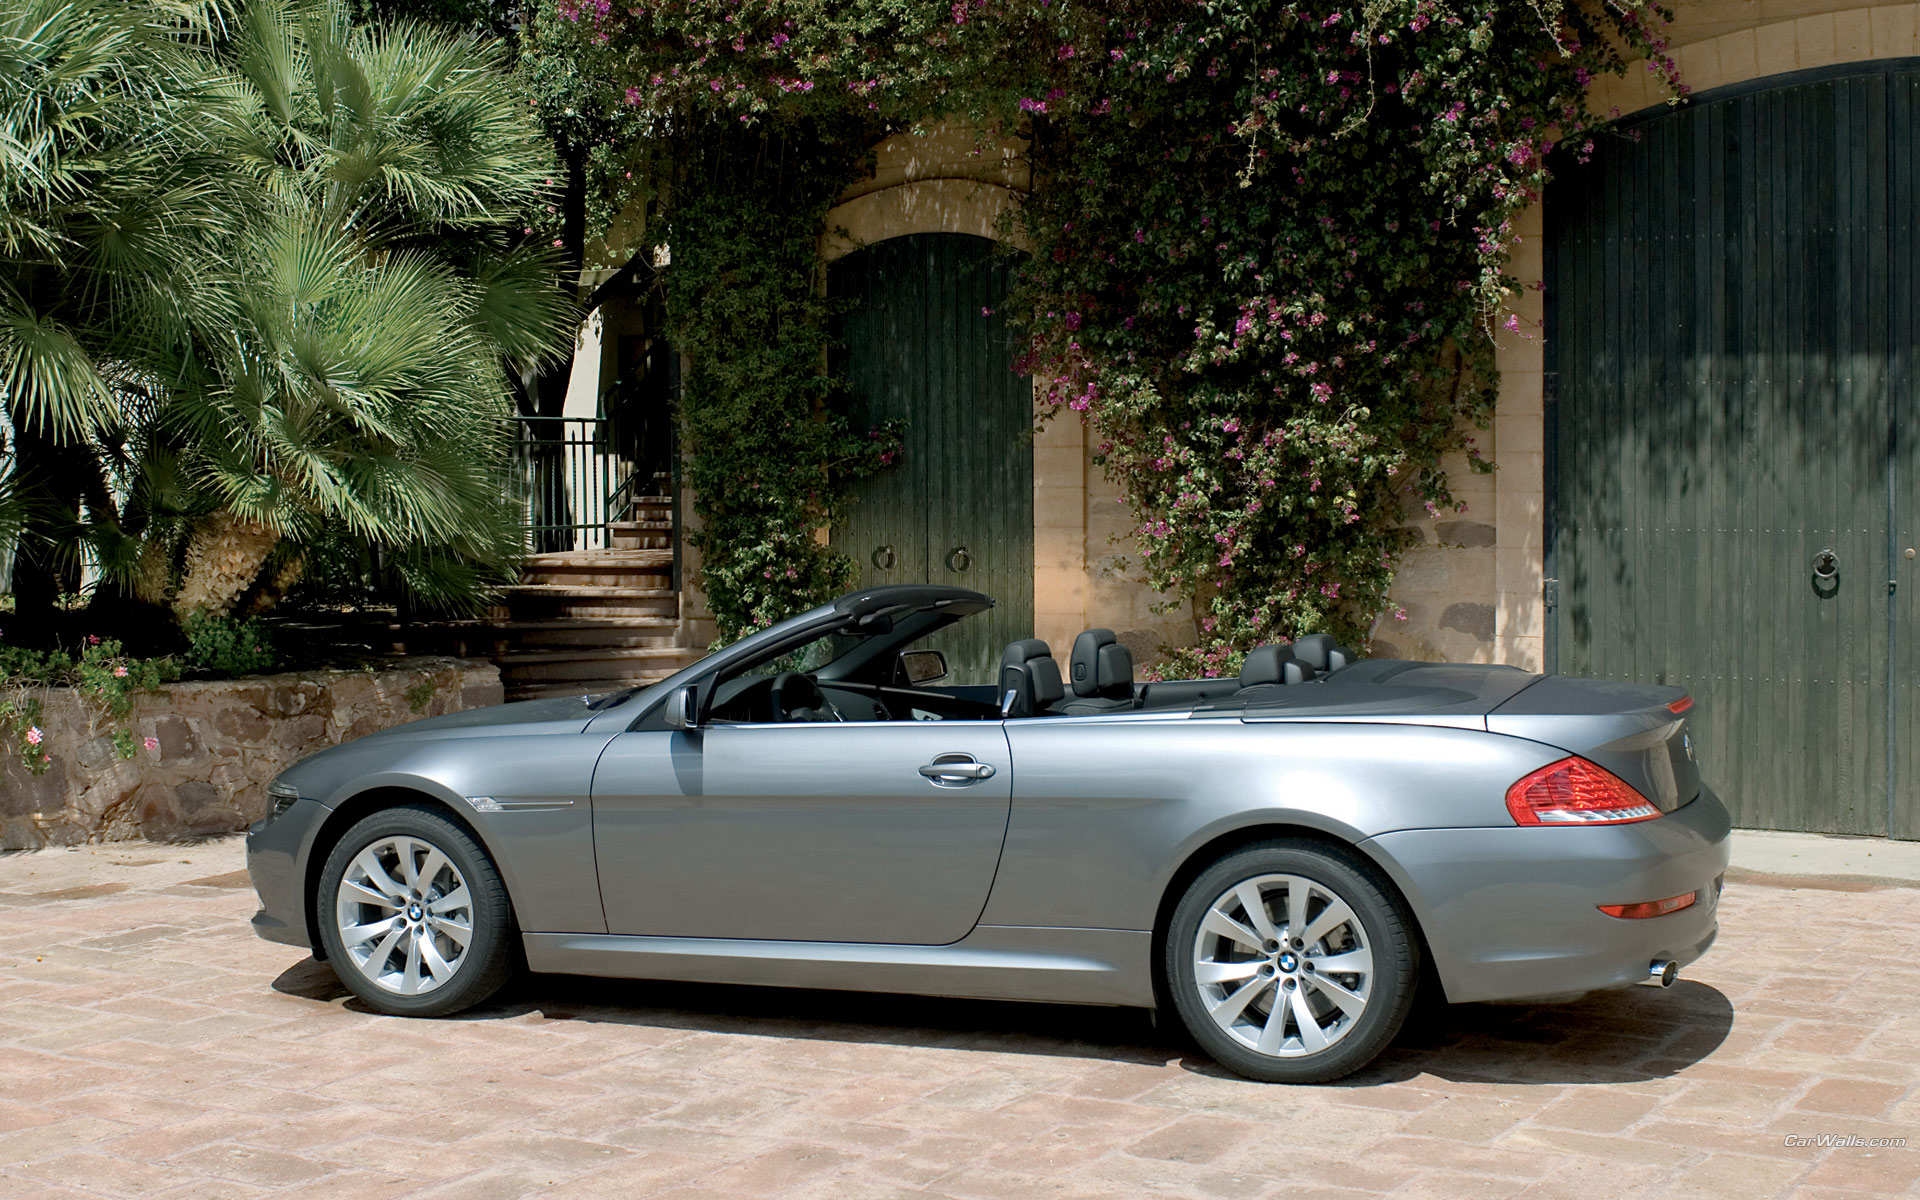 Download full size 6 series cabriolet Bmw wallpaper / 1920x1200